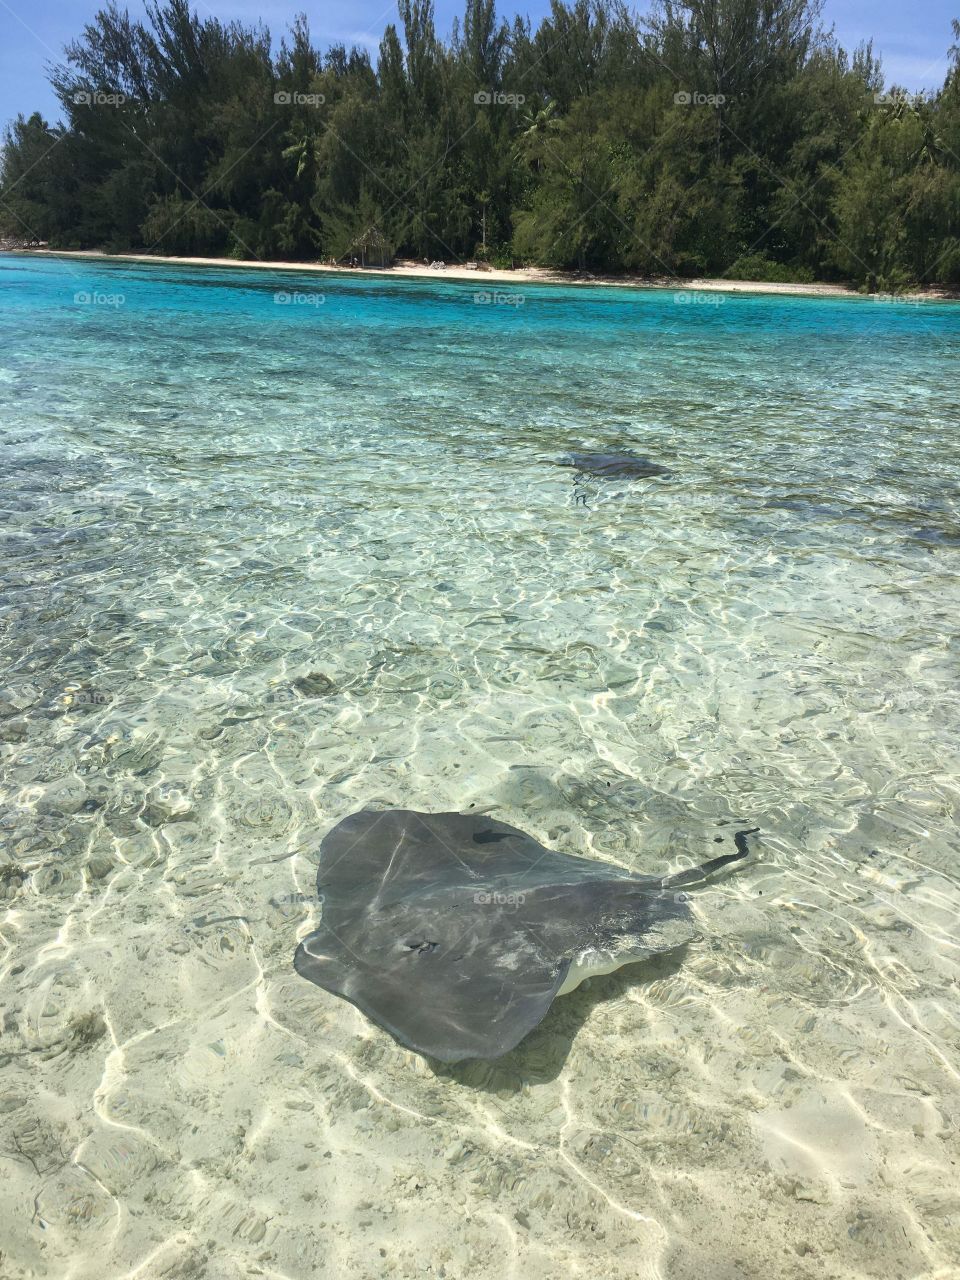 Stingray in clear water in Moorea